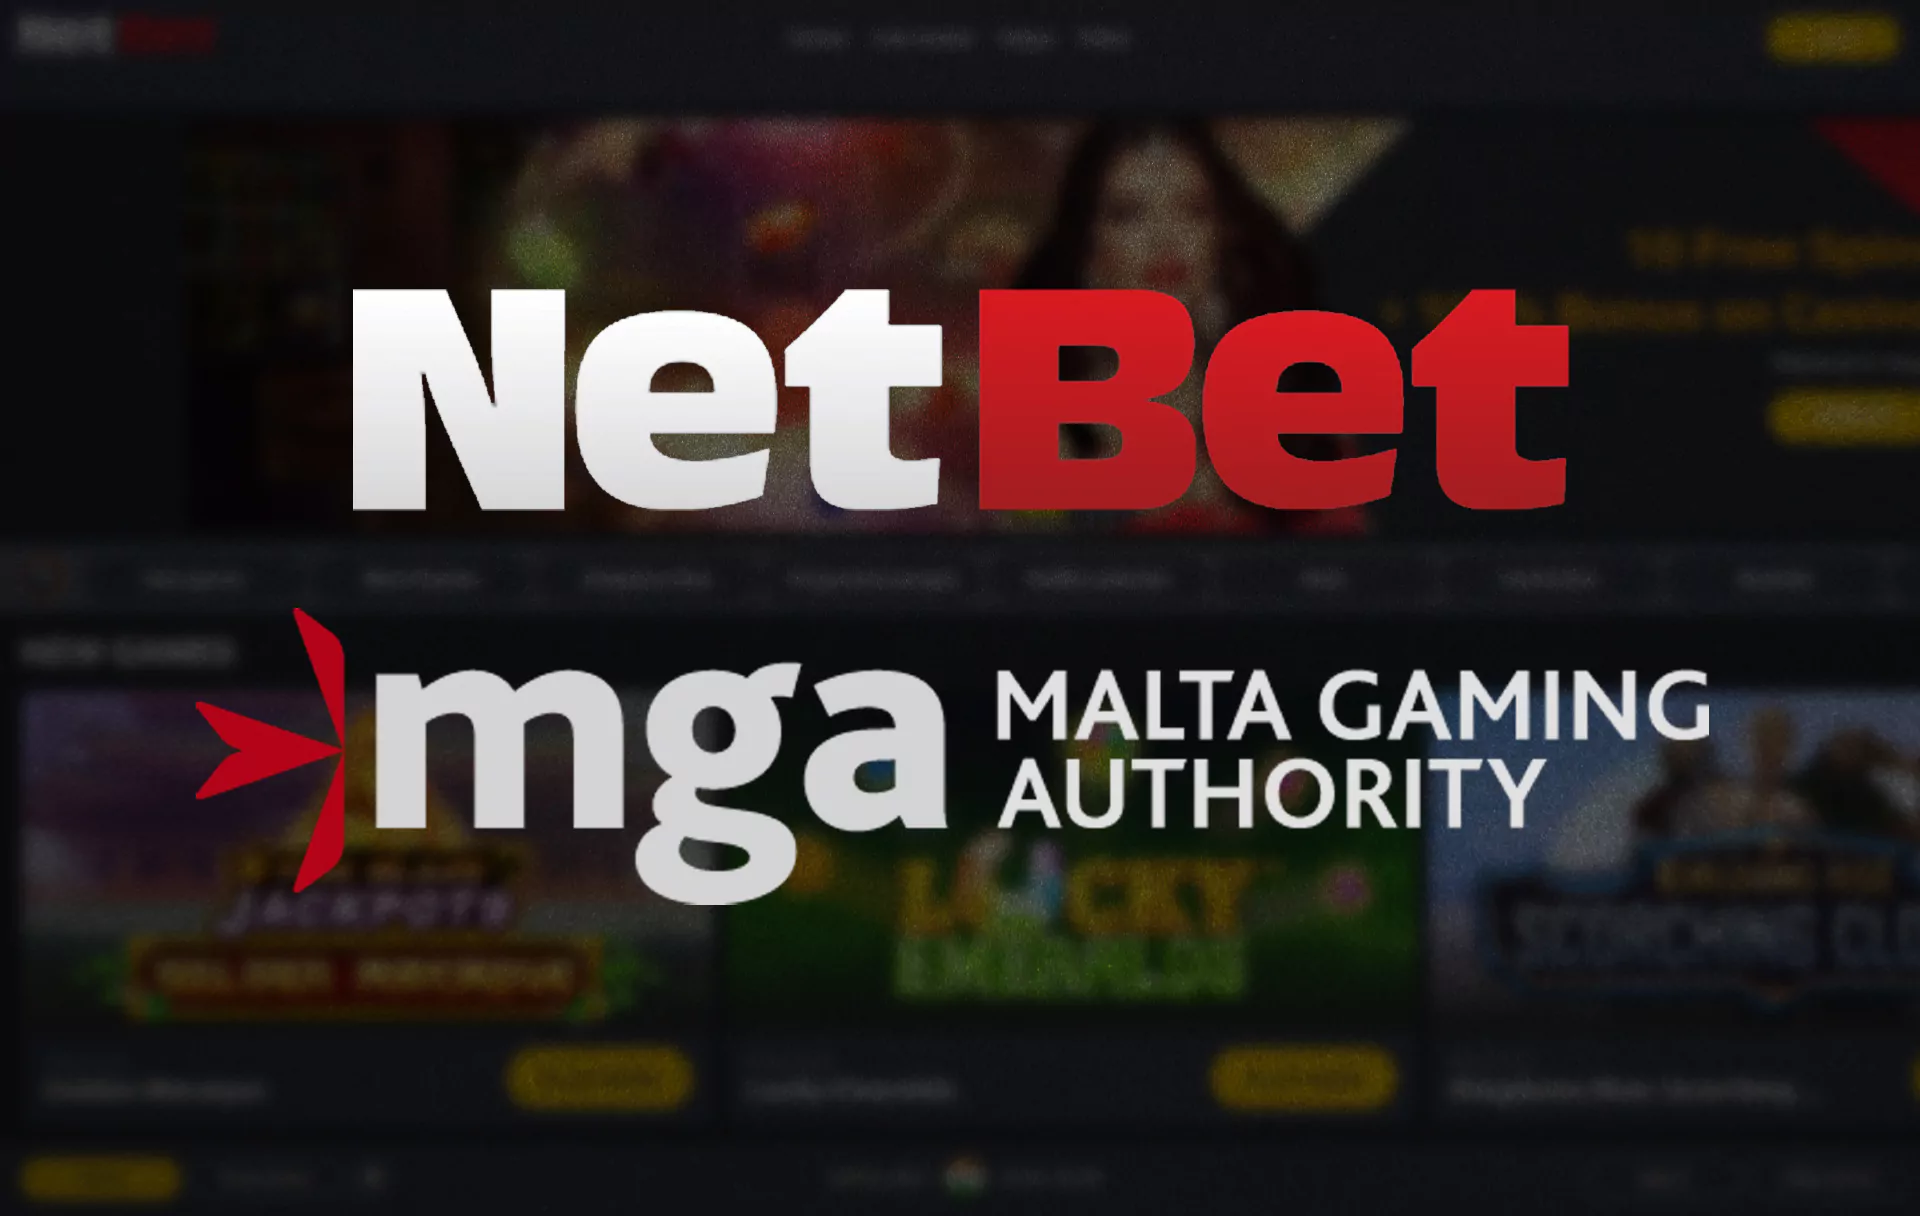 In the vast majority of countries, the Netbet works under Malta license.